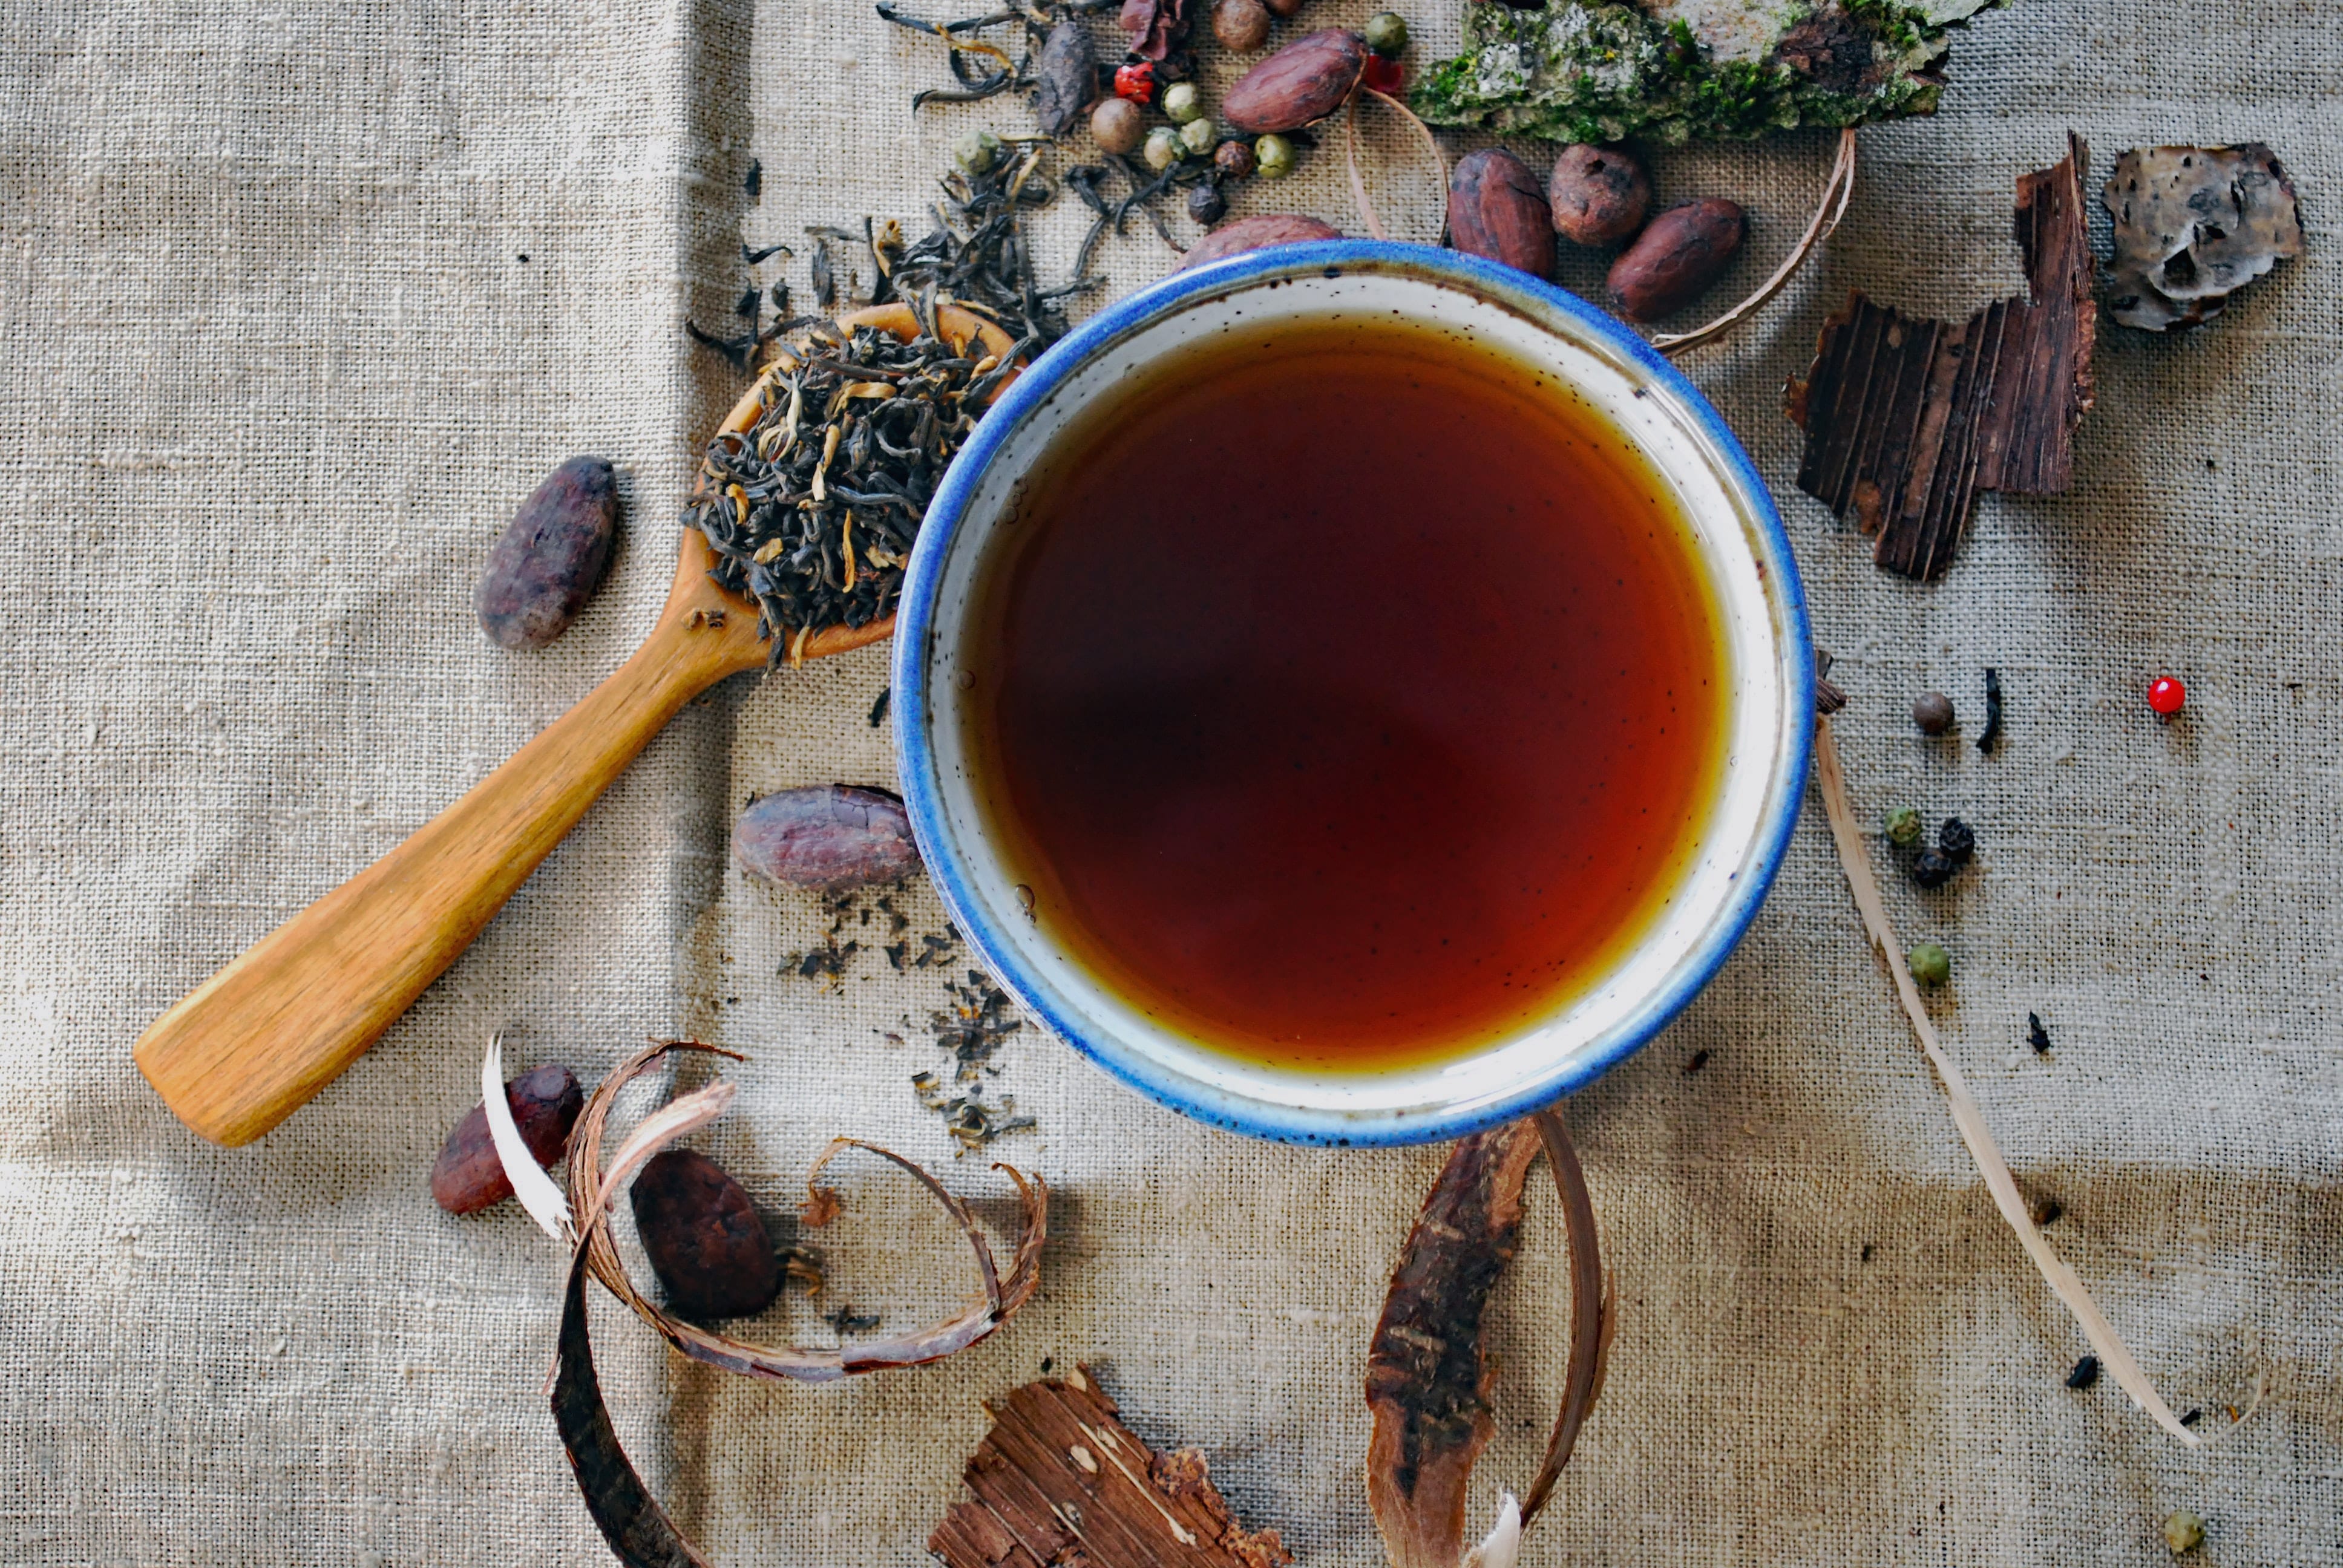 How to make your own herbal tea